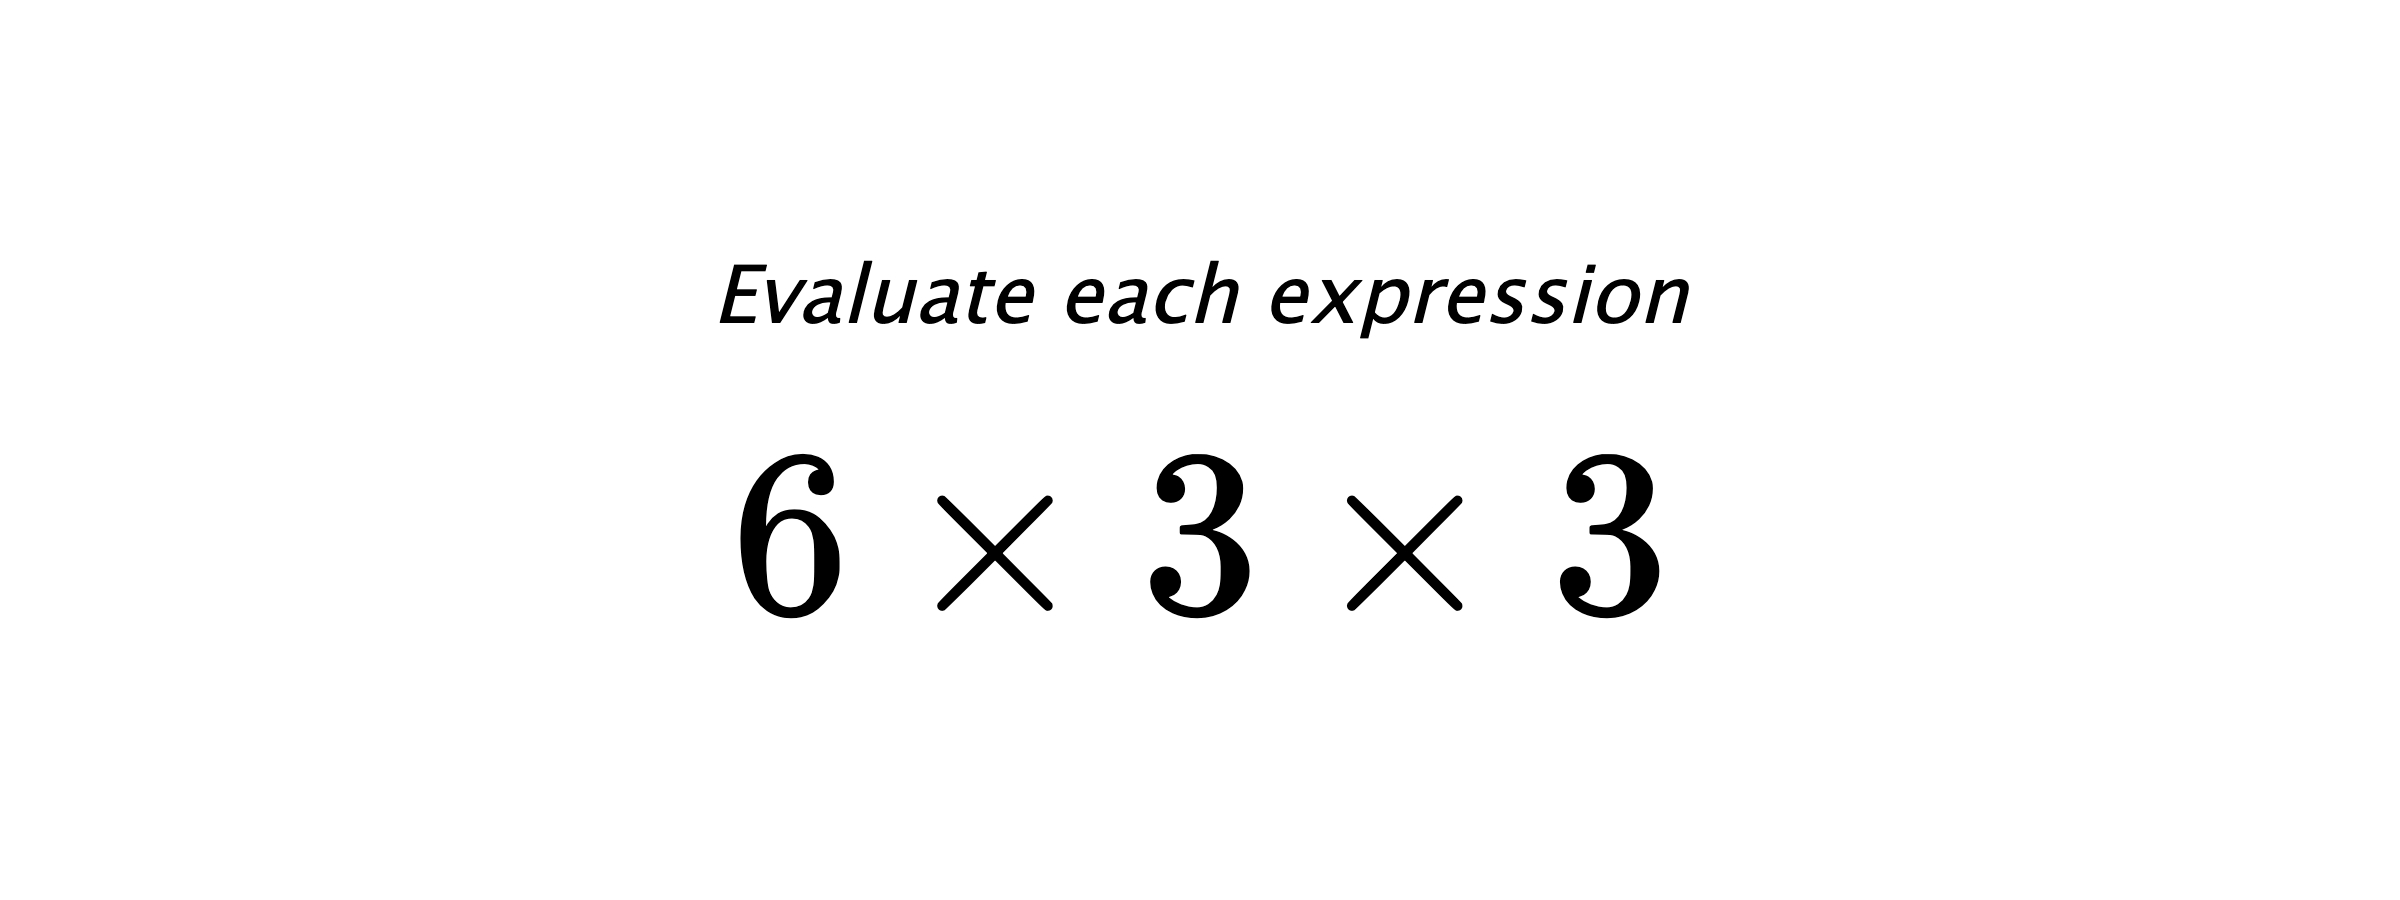 Evaluate each expression $ 6 \times 3 \times 3 $